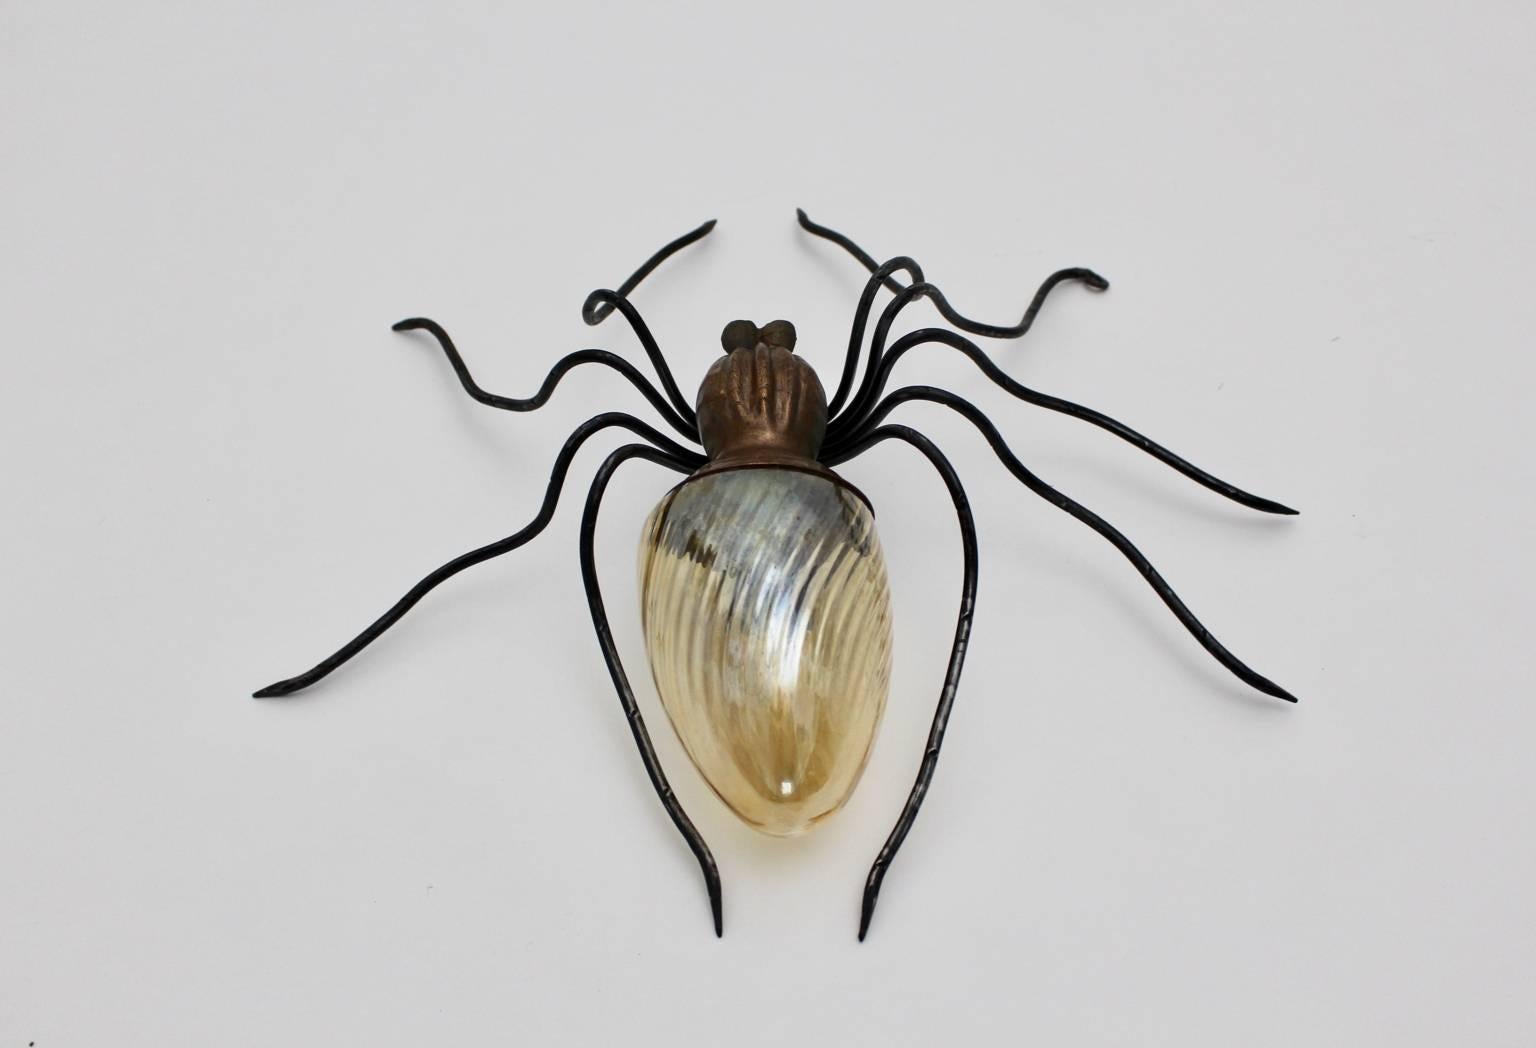 Mid-Century Modern wall lamp shaped like a spider.
The legs were made of metal wire, the body was made of copper with a yellow grooved glass shade.
It lights with a bulb E 14.